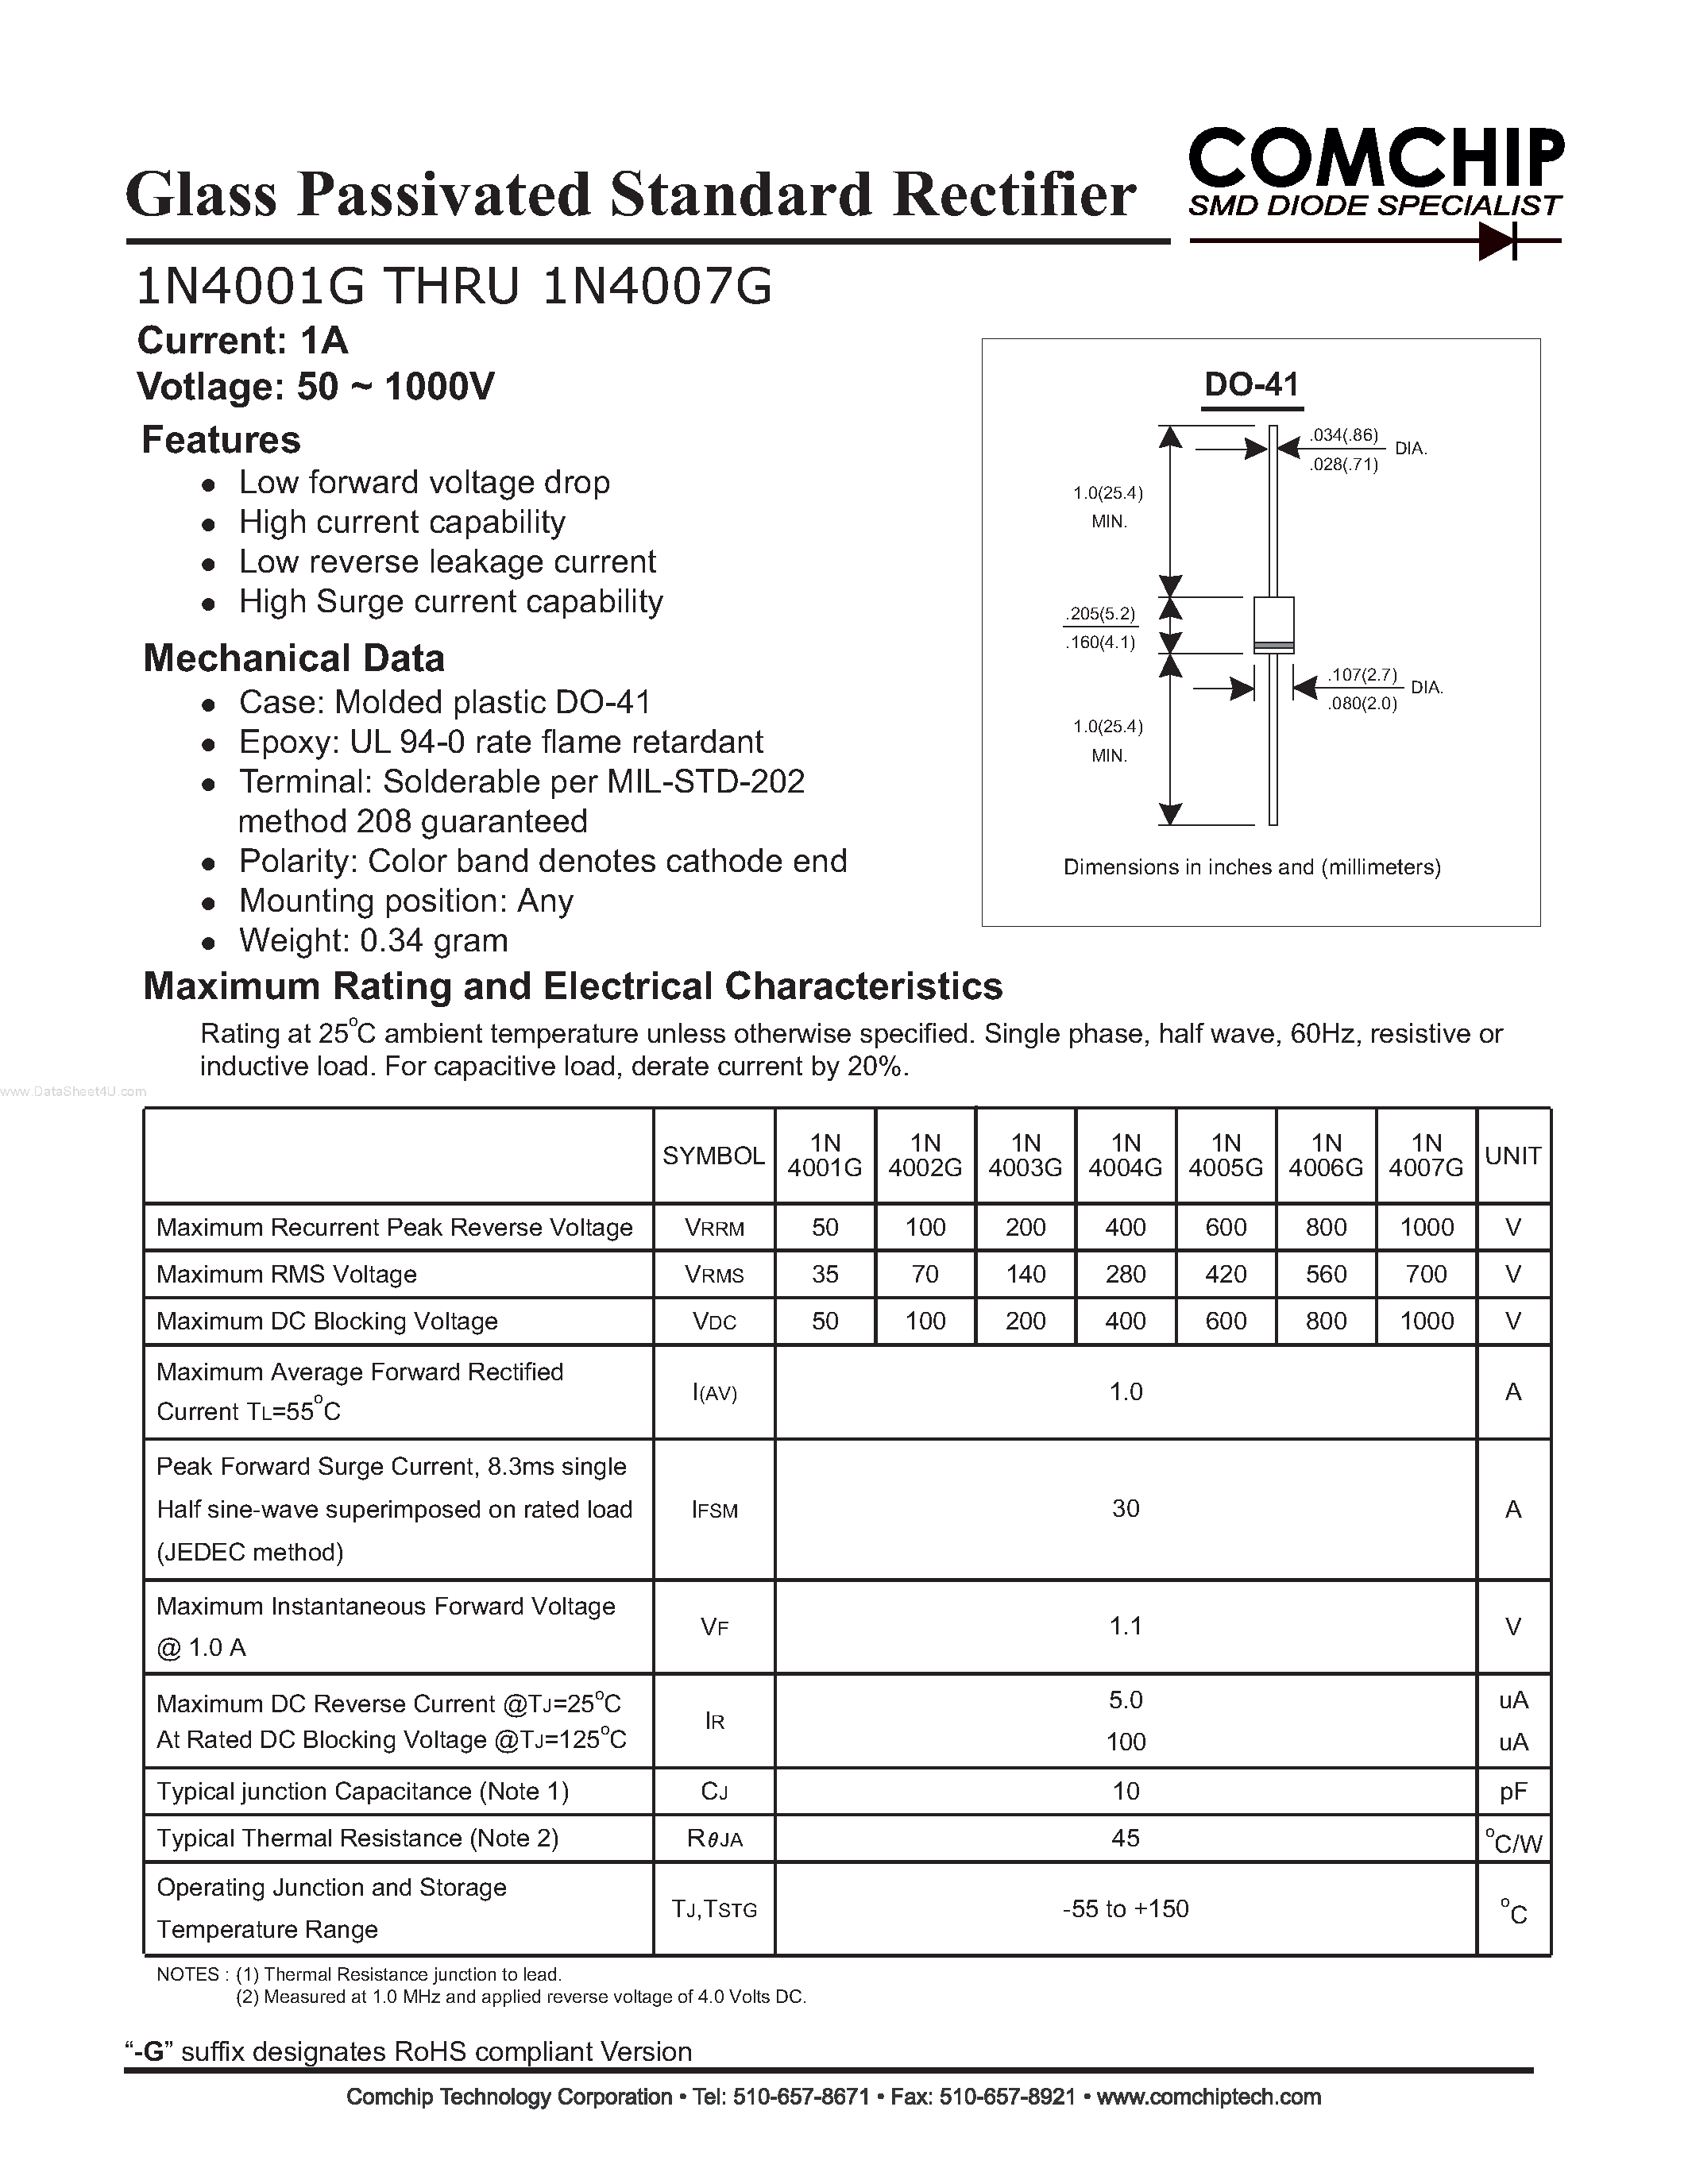 Datasheet 1N4001G - (1N4001G - 1N4007G) Glass Passivated Standard Rectifier page 1